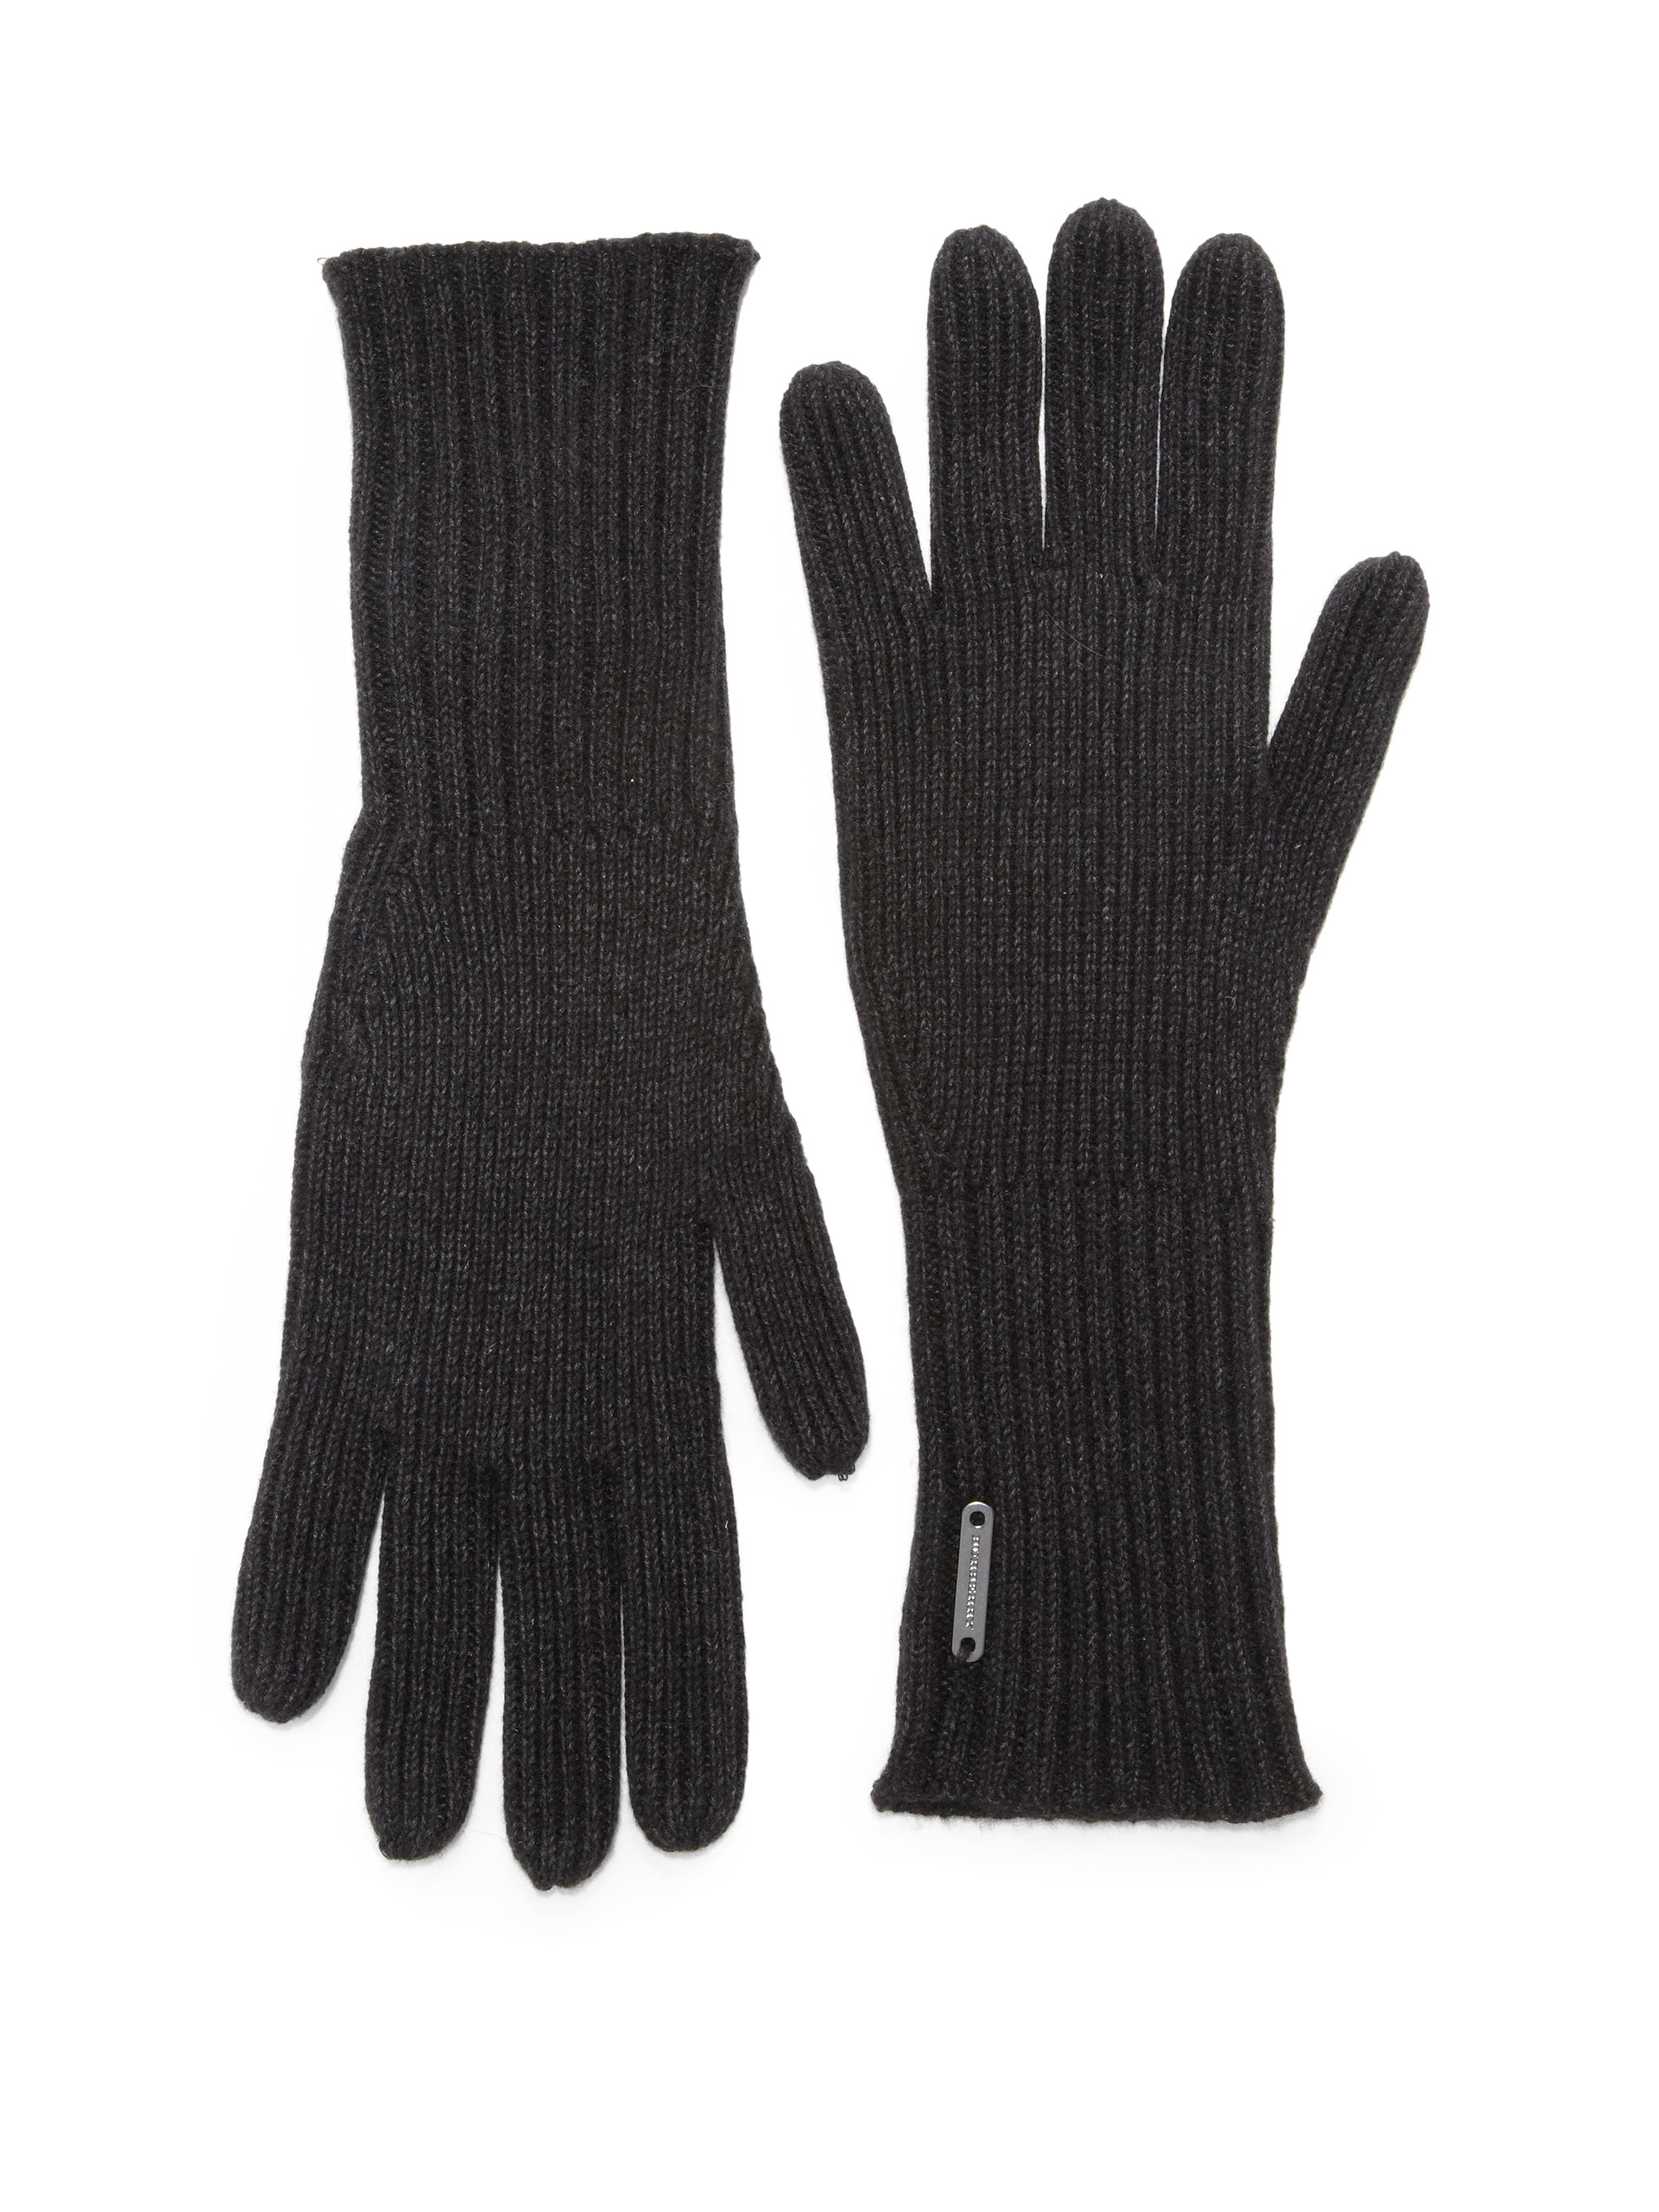 Burberry Ribbed Knit Gloves in Black - Lyst